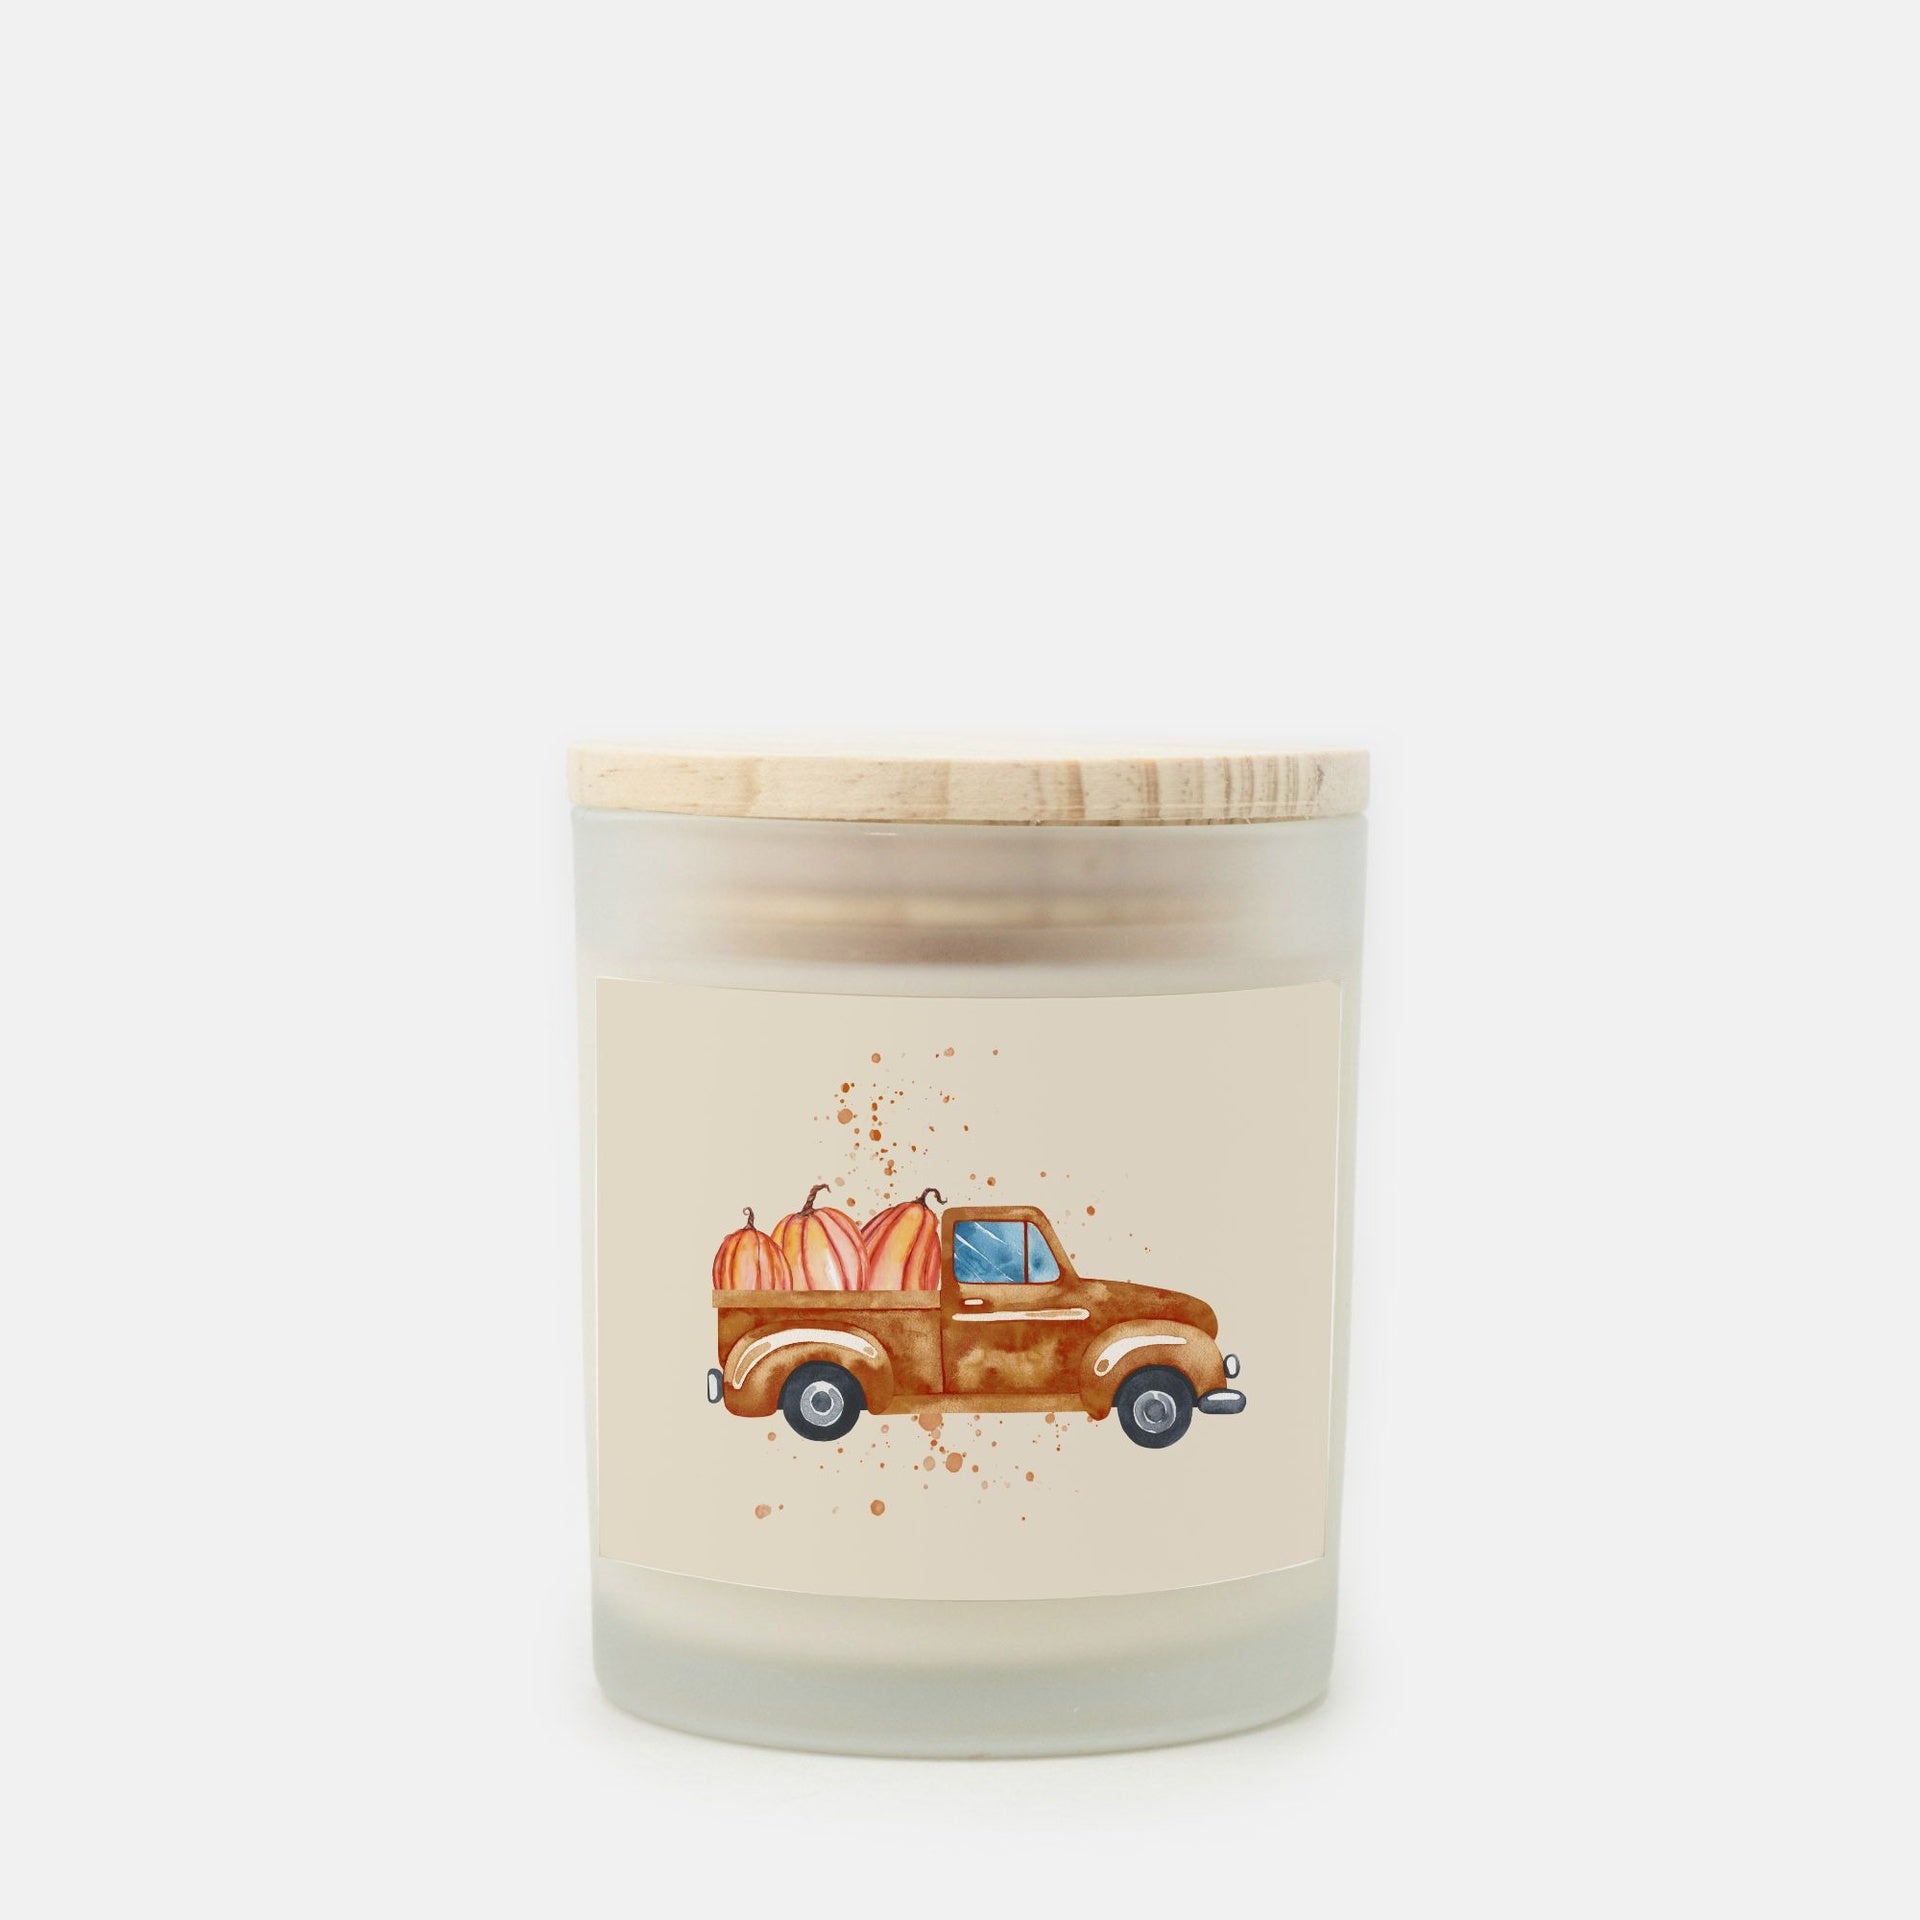 Lifestyle Details - 11oz Brown Rustic Truck & Pumpkins Frosted Glass Candle - Cashmere Vanilla